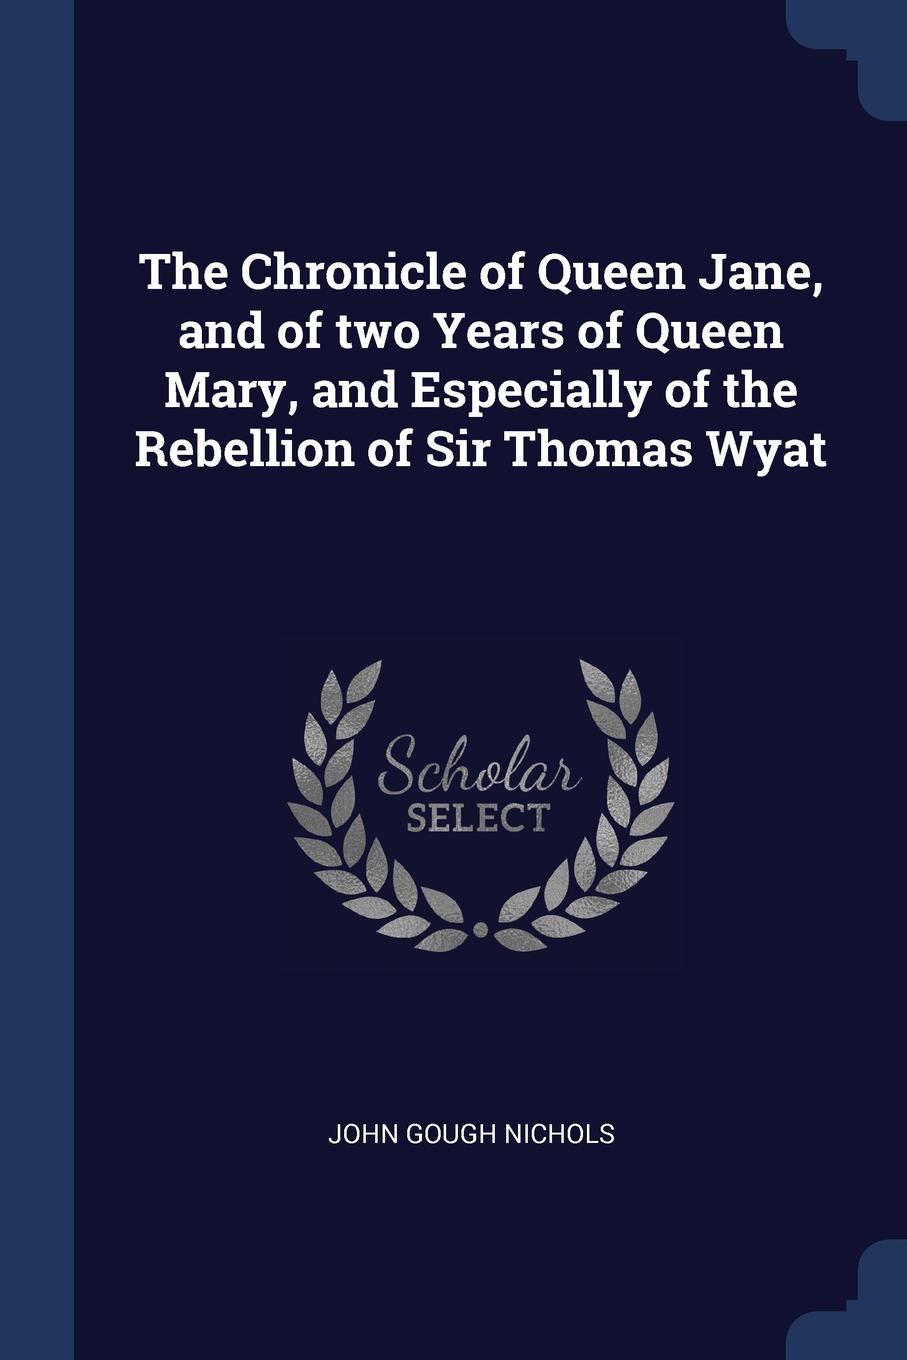 The Chronicle of Queen Jane, and of two Years of Queen Mary, and Especially of the Rebellion of Sir Thomas Wyat